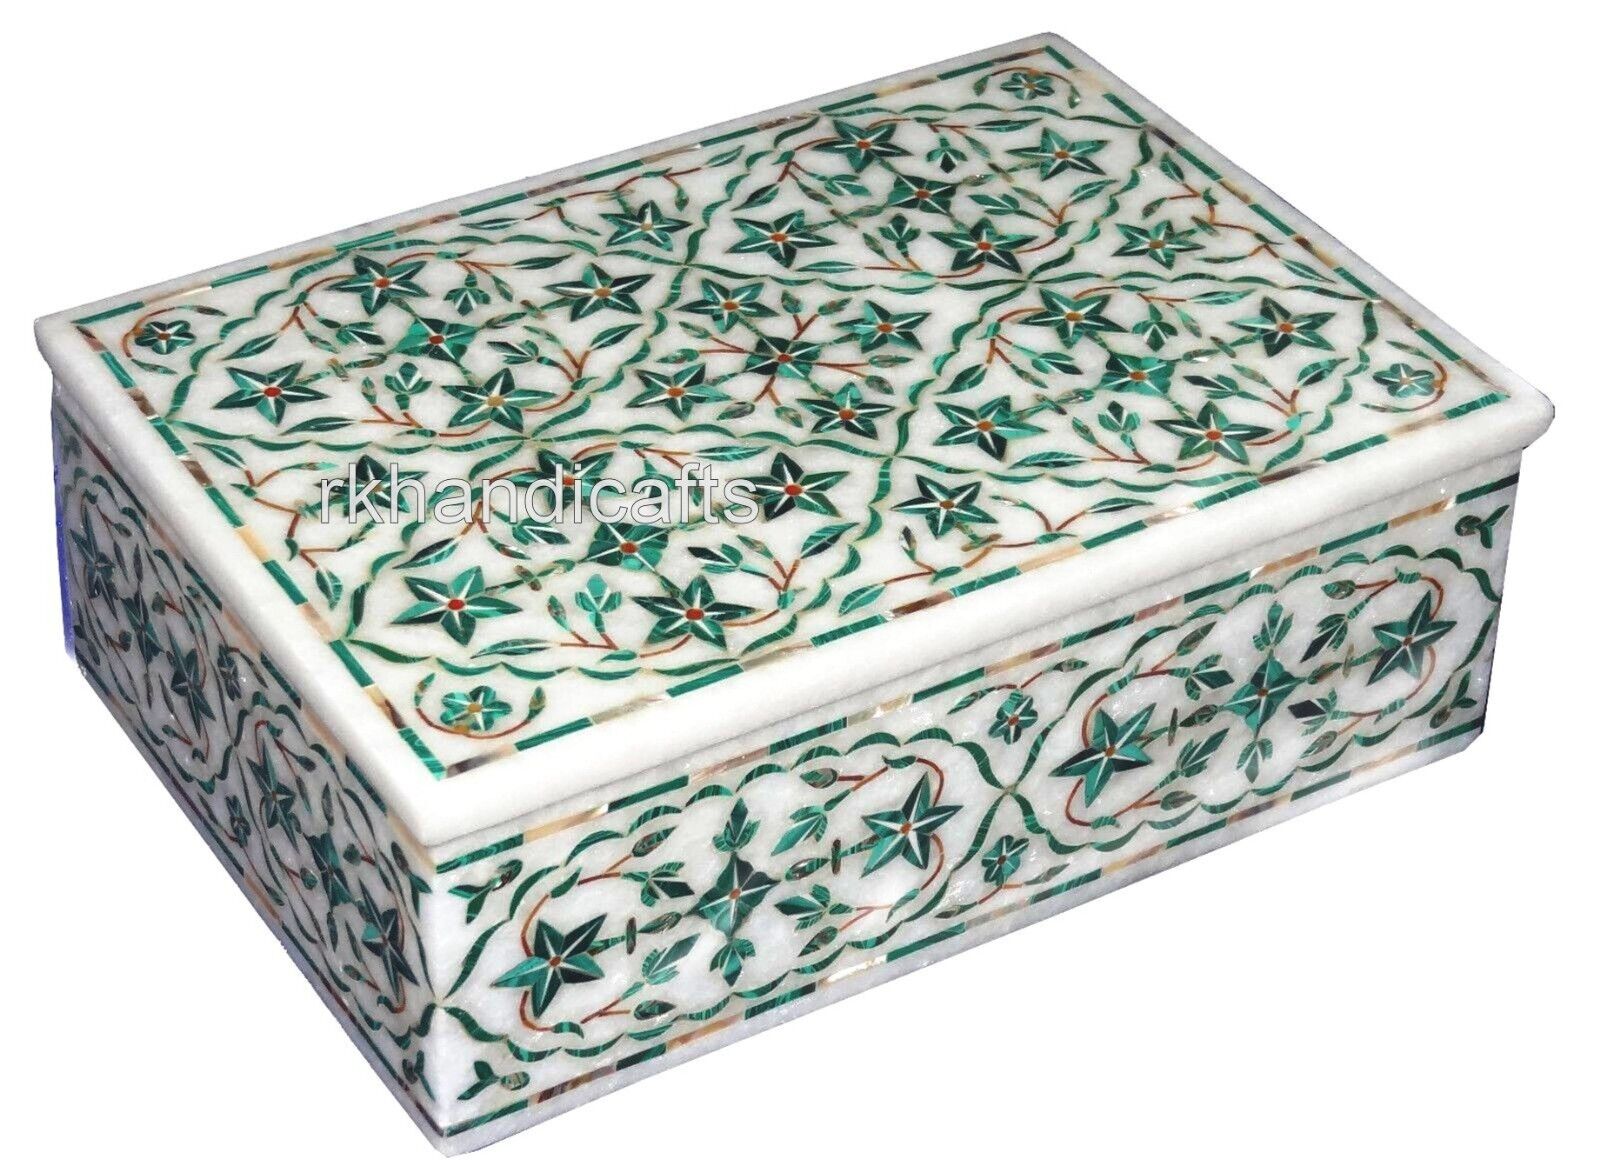 Antique Pattern Inlay Work Trinket Box White Marble Giftable Box for New Year